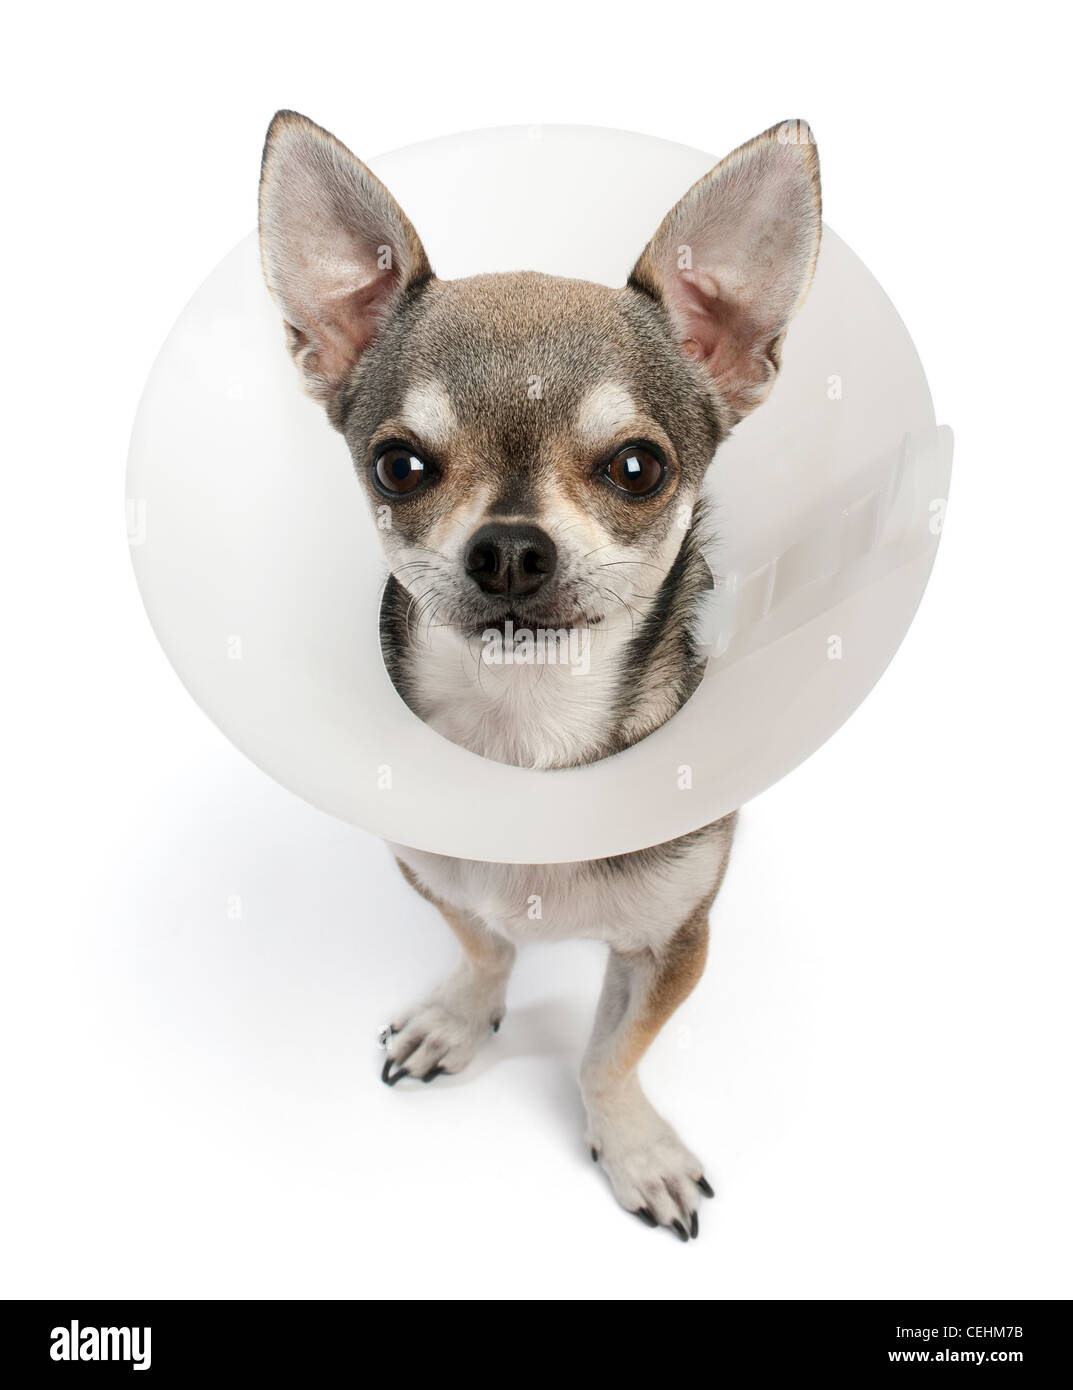 Chihuahua, 4 years old, wearing a space collar against white background  Stock Photo - Alamy